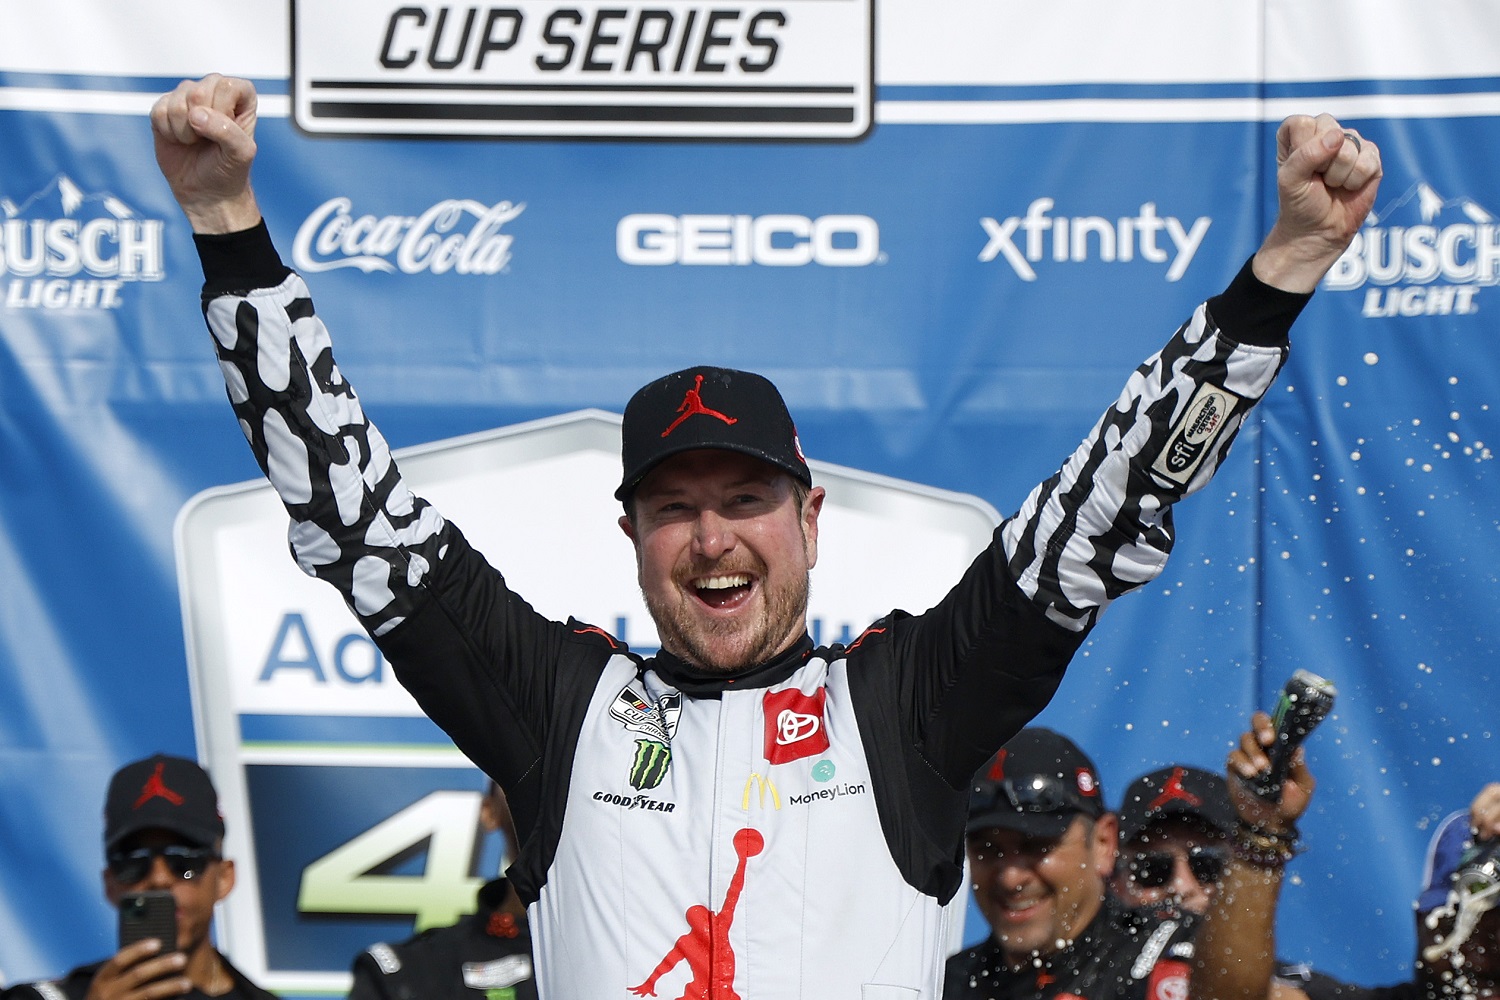 Kurt Busch celebrates in Victory Lane after winning the NASCAR Cup Series AdventHealth 400 at Kansas Speedway on May 15, 2022.